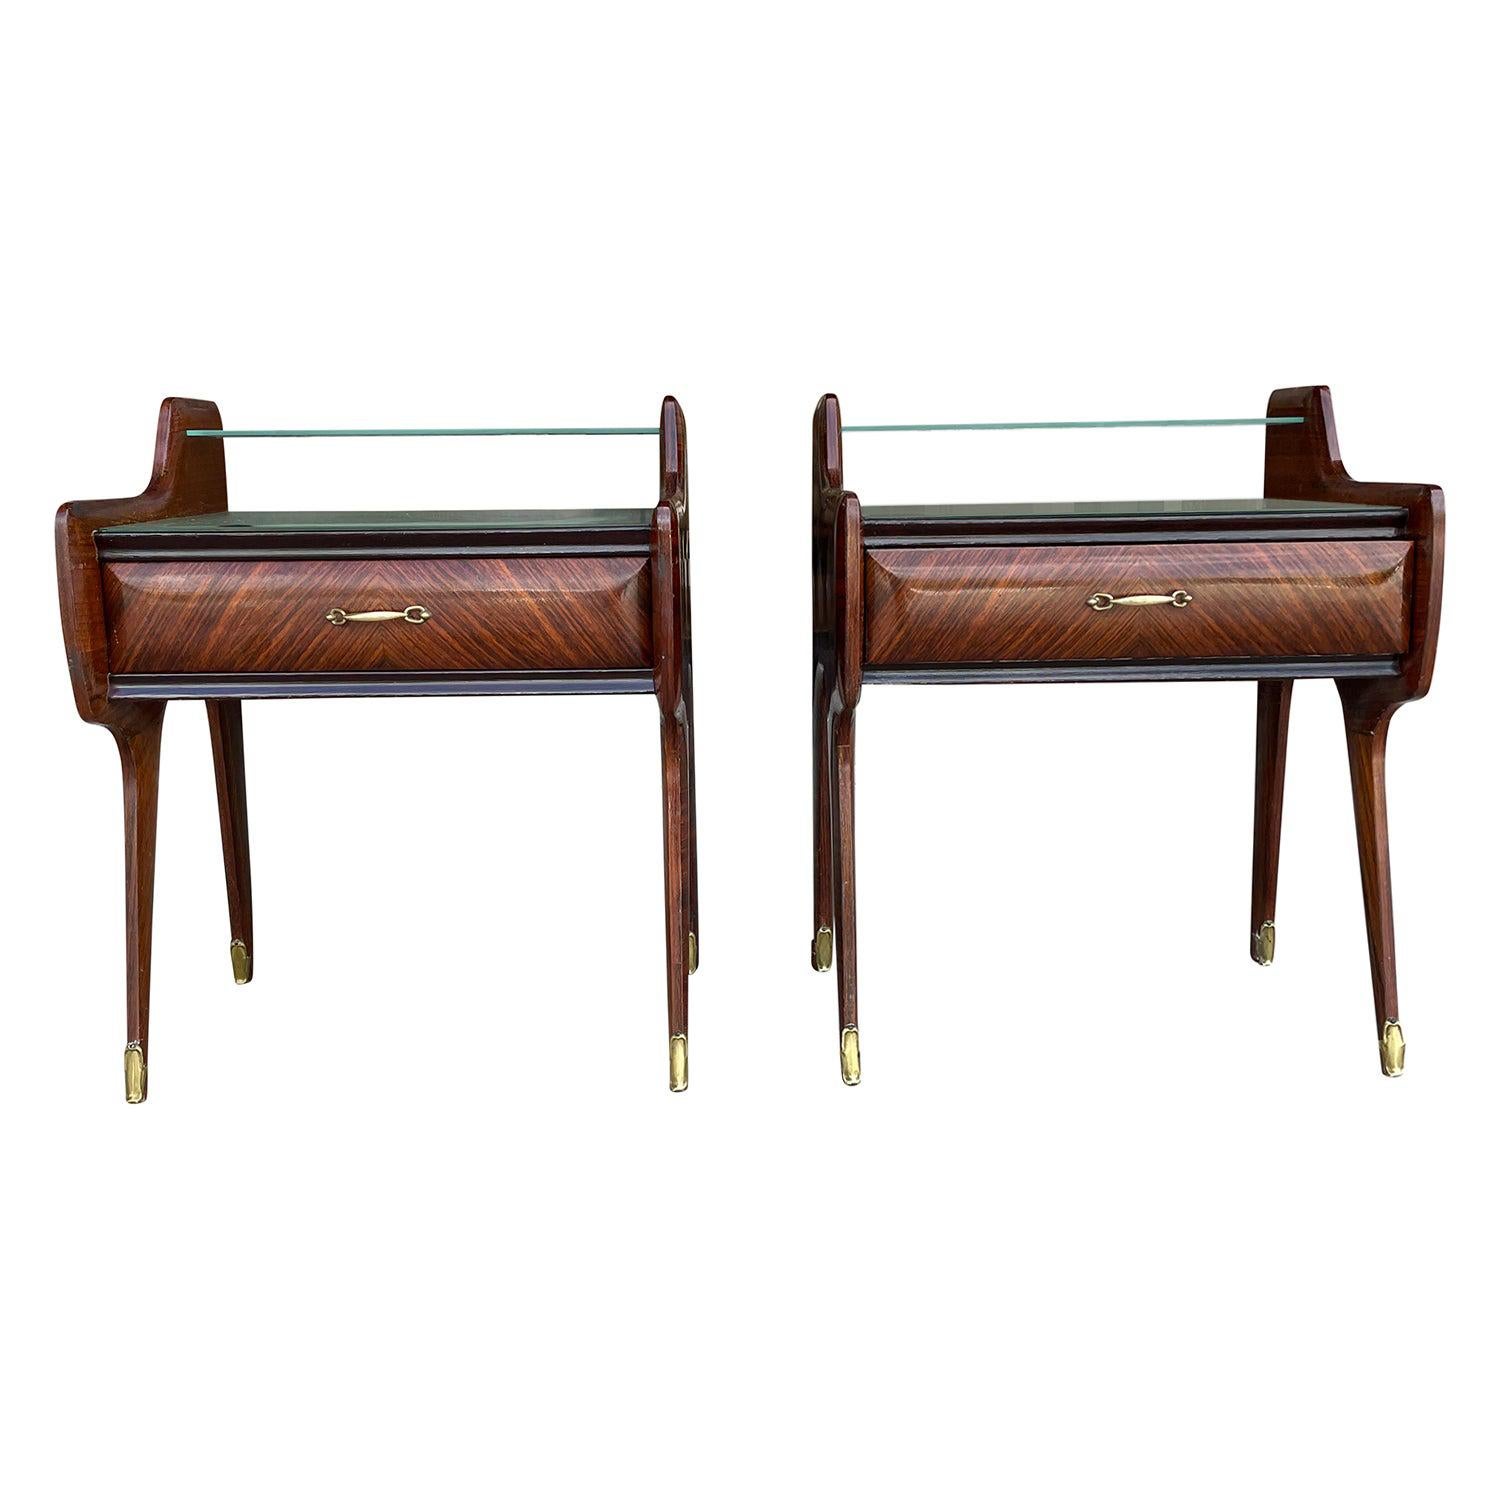 20th Century Pair of Italian Nightstands, Rosewood Side Tables by Paolo Buffa